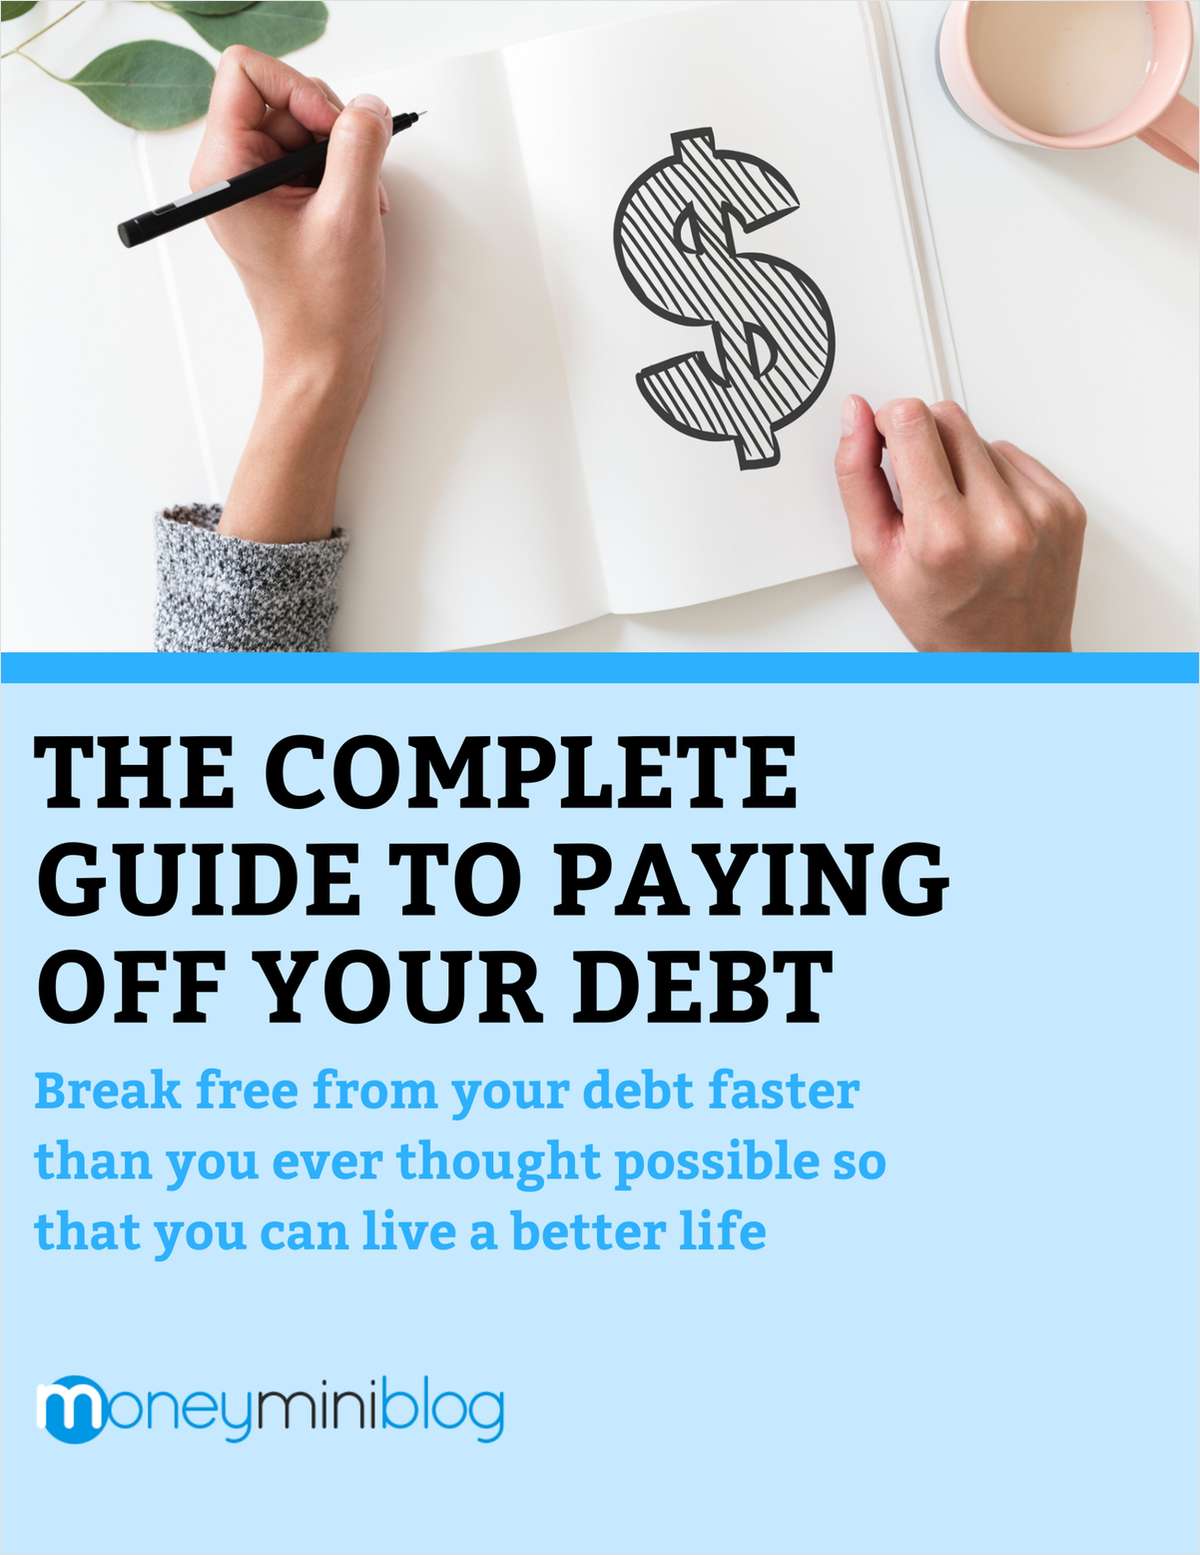 The Complete Guide to Paying Off Your Debt